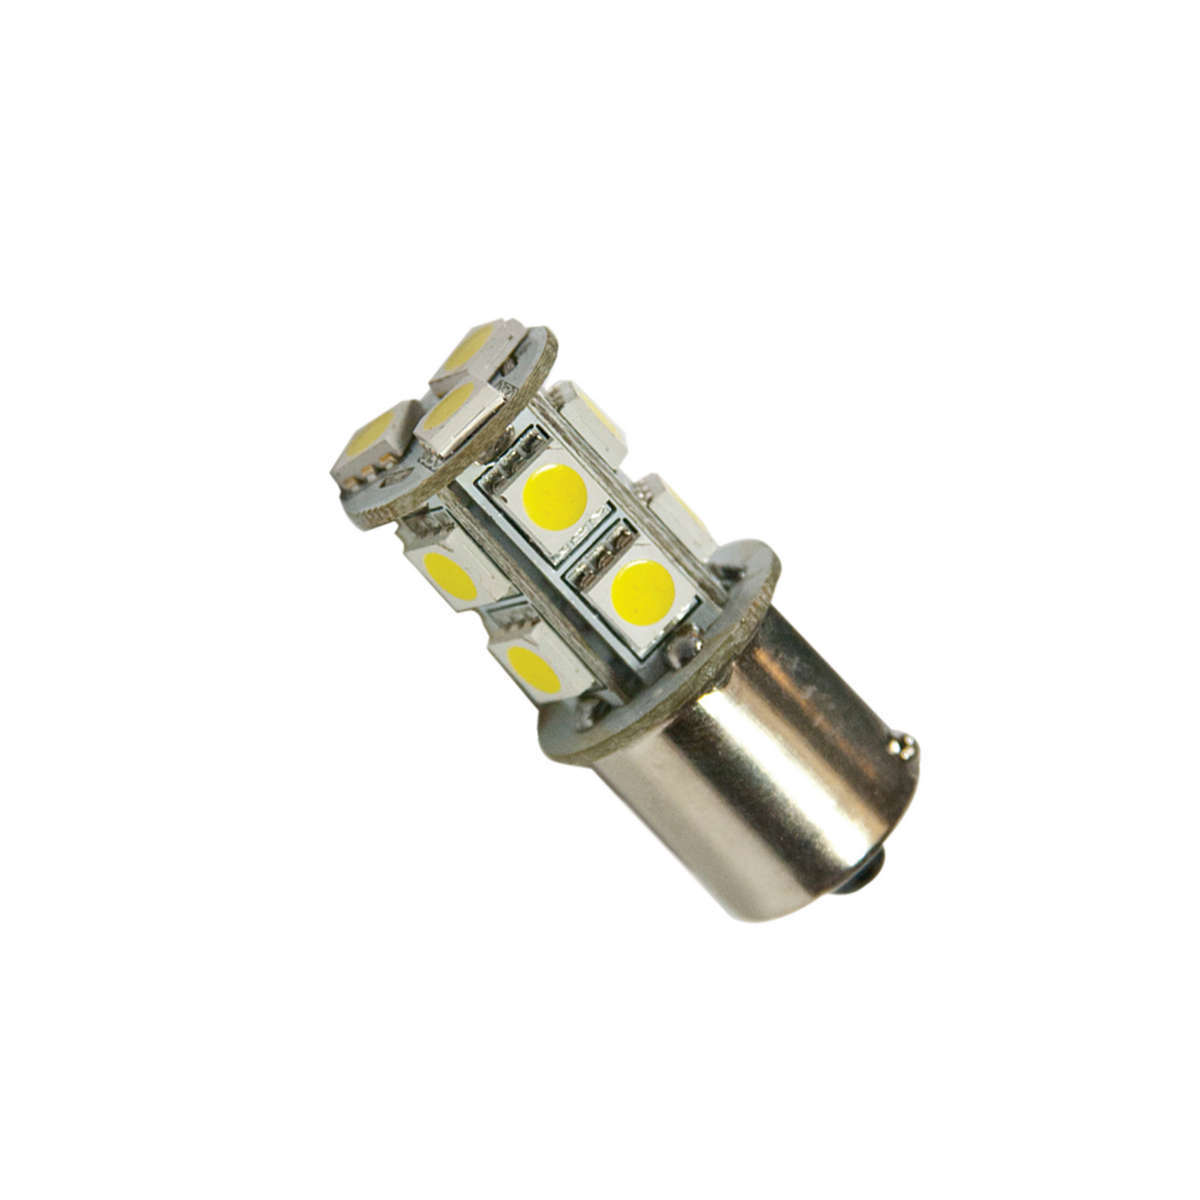 ORACLE LIGHTING 1156 13 LED 3-Chip Bulb Single Cool White